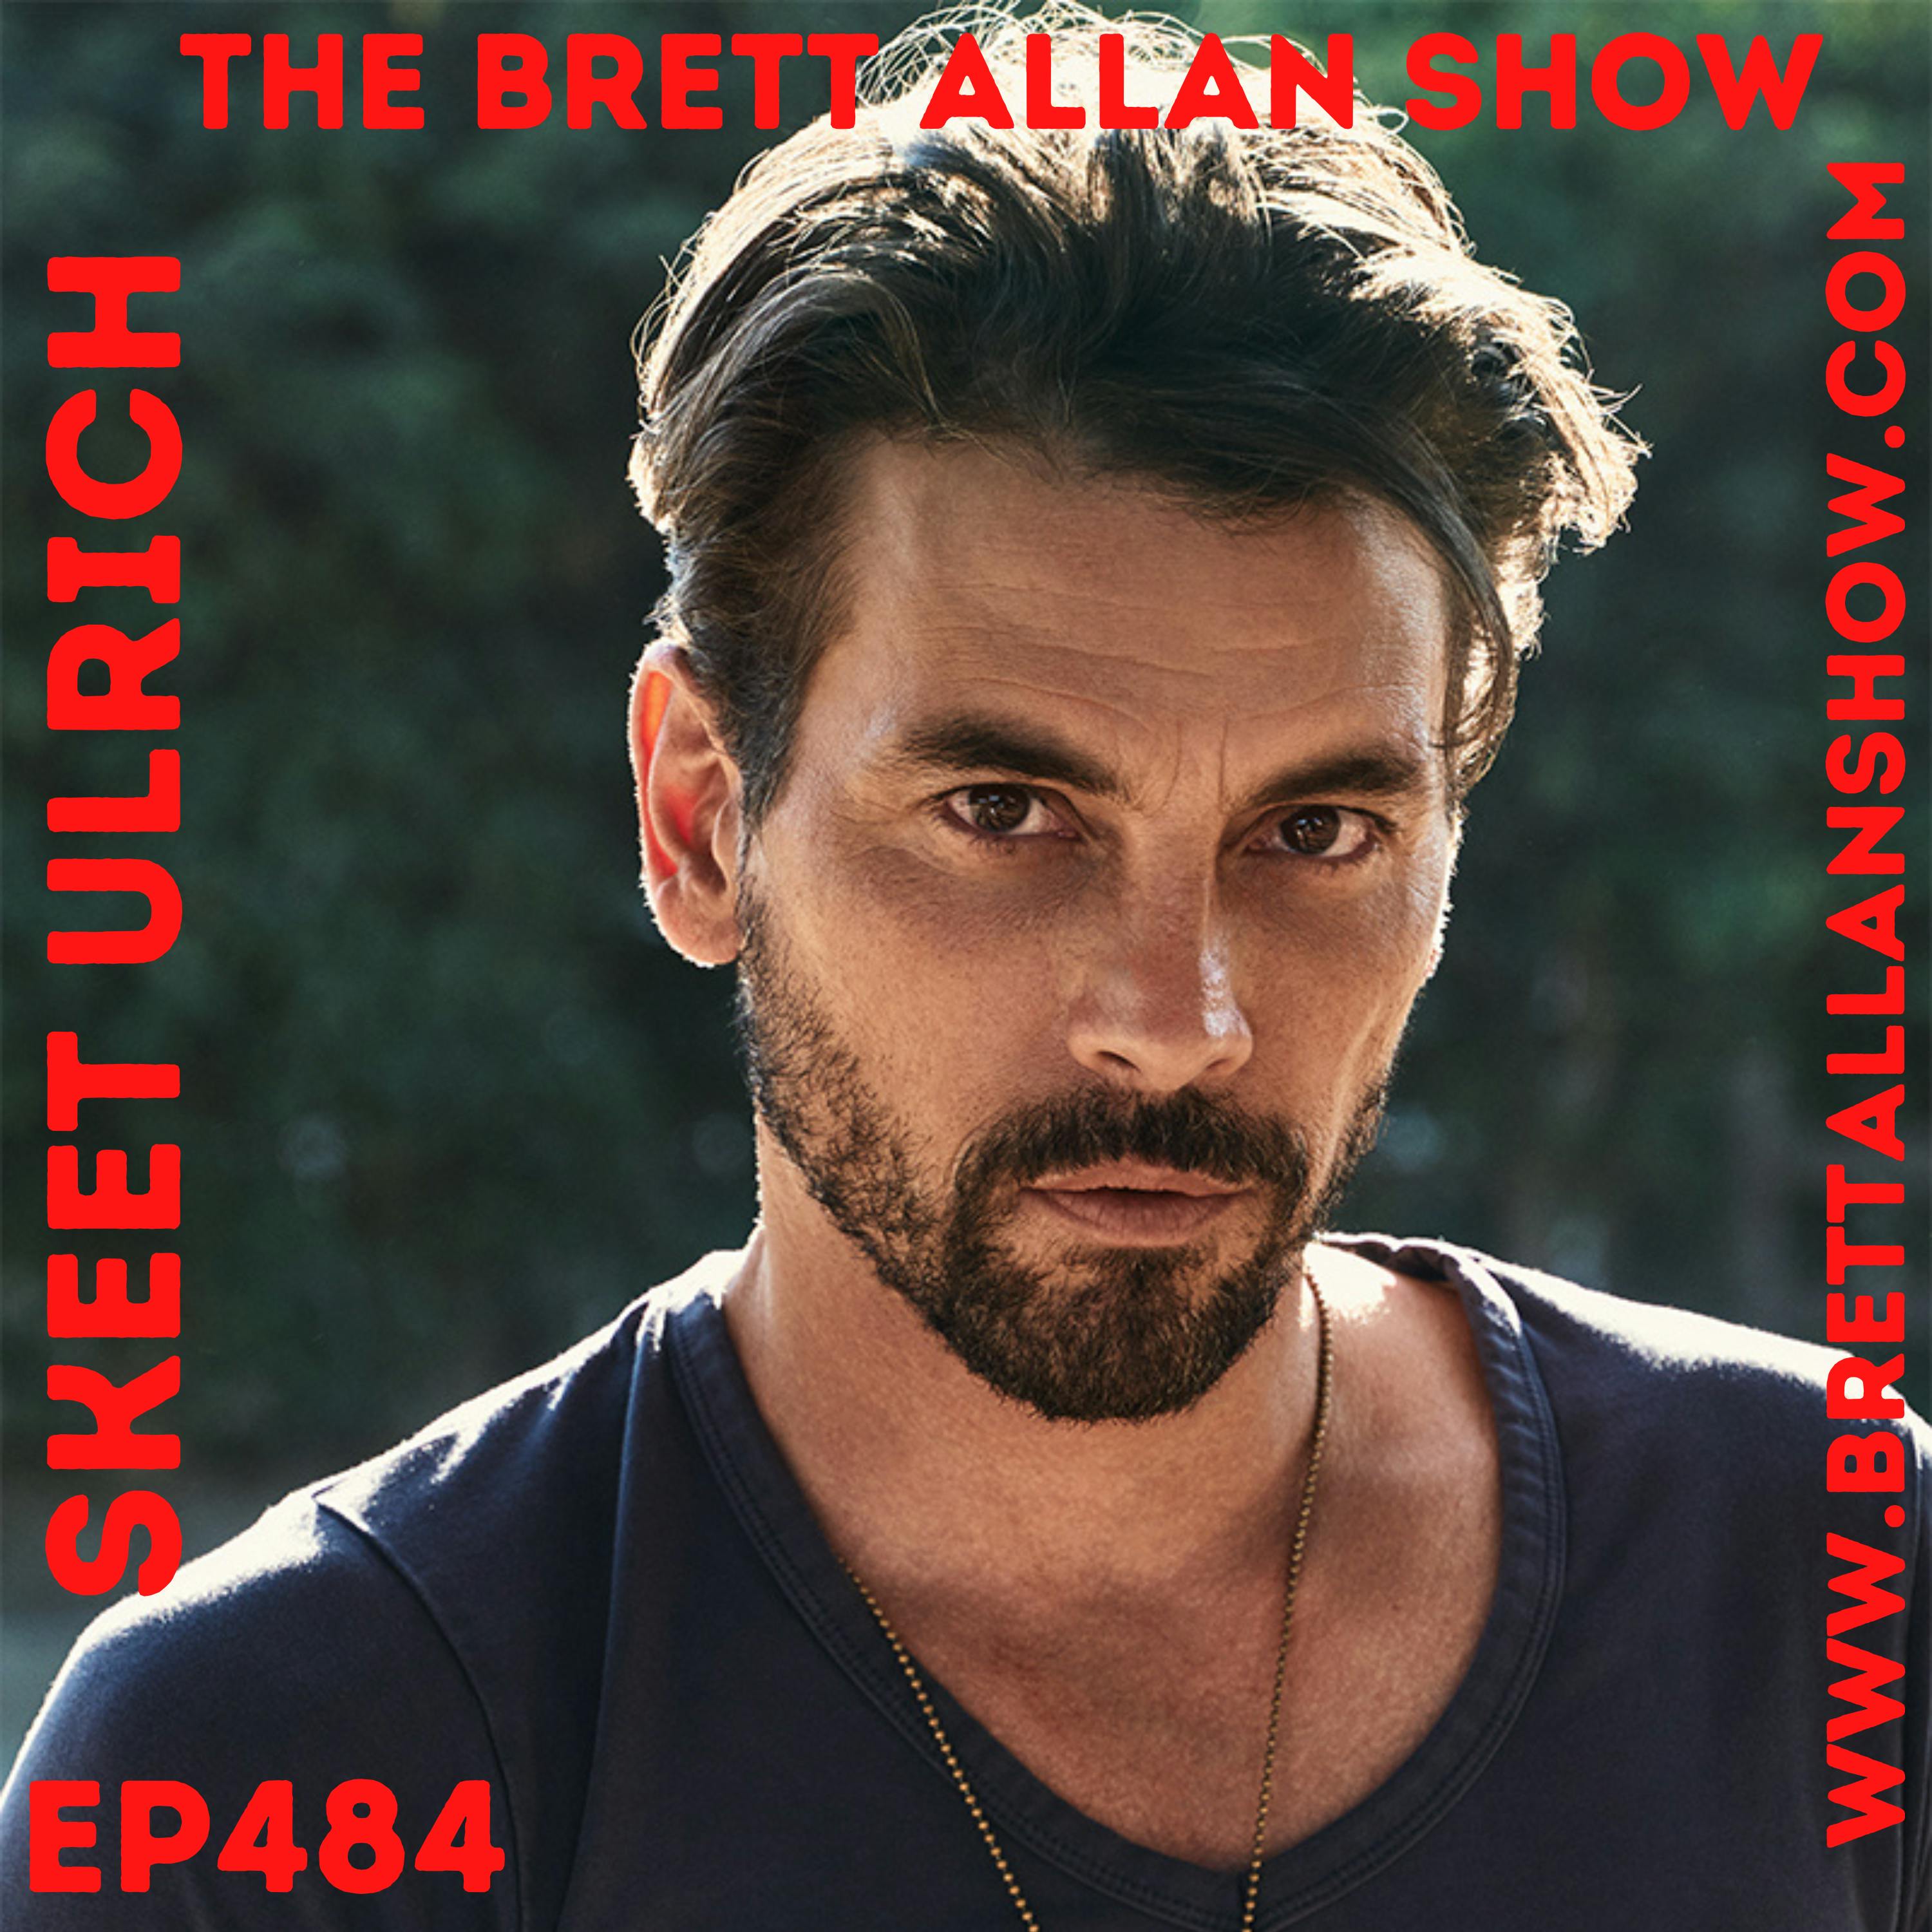 Skeet Ulrich Talks "Blood" The Age of Content and Cinema and Much More! Image